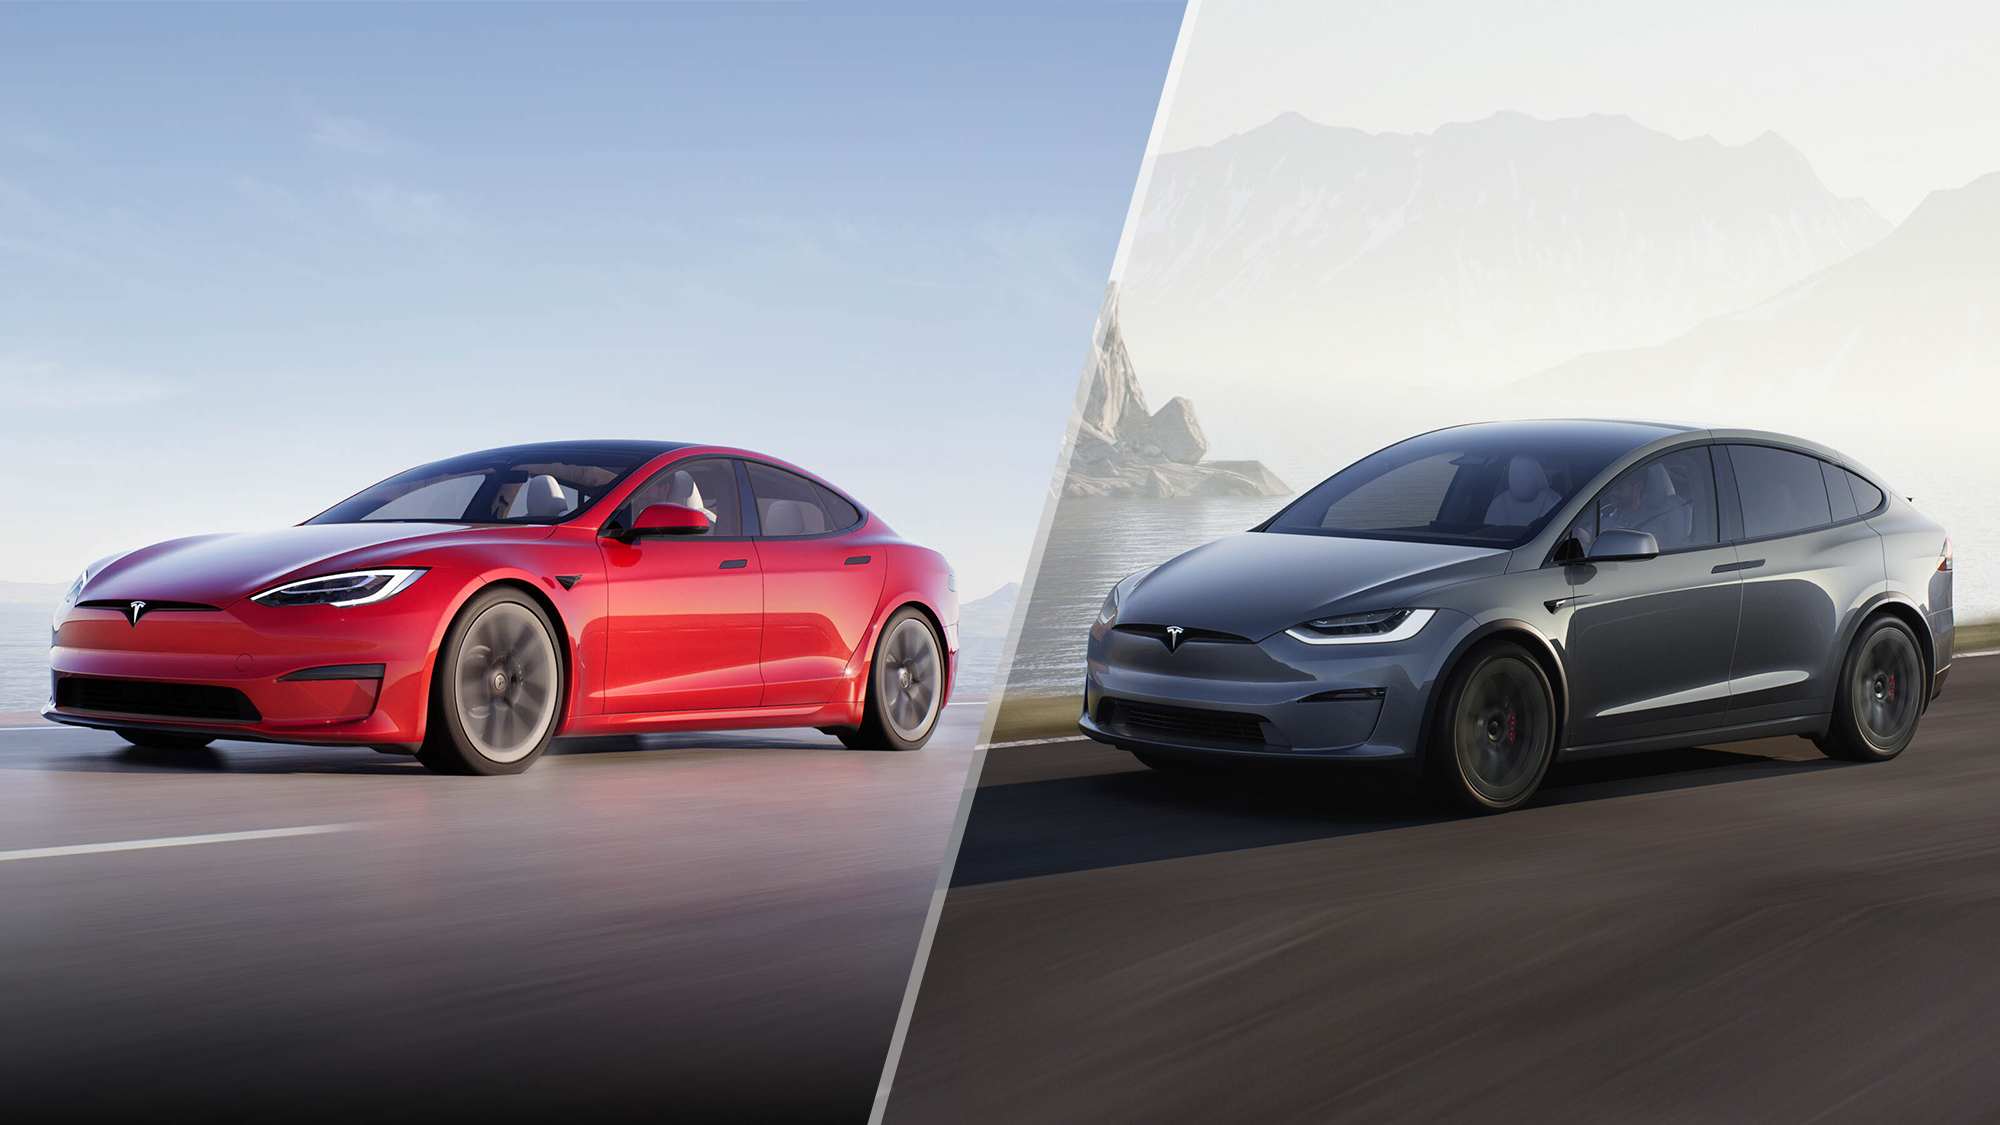 Tesla Model S vs. Model X: Which is right for you?